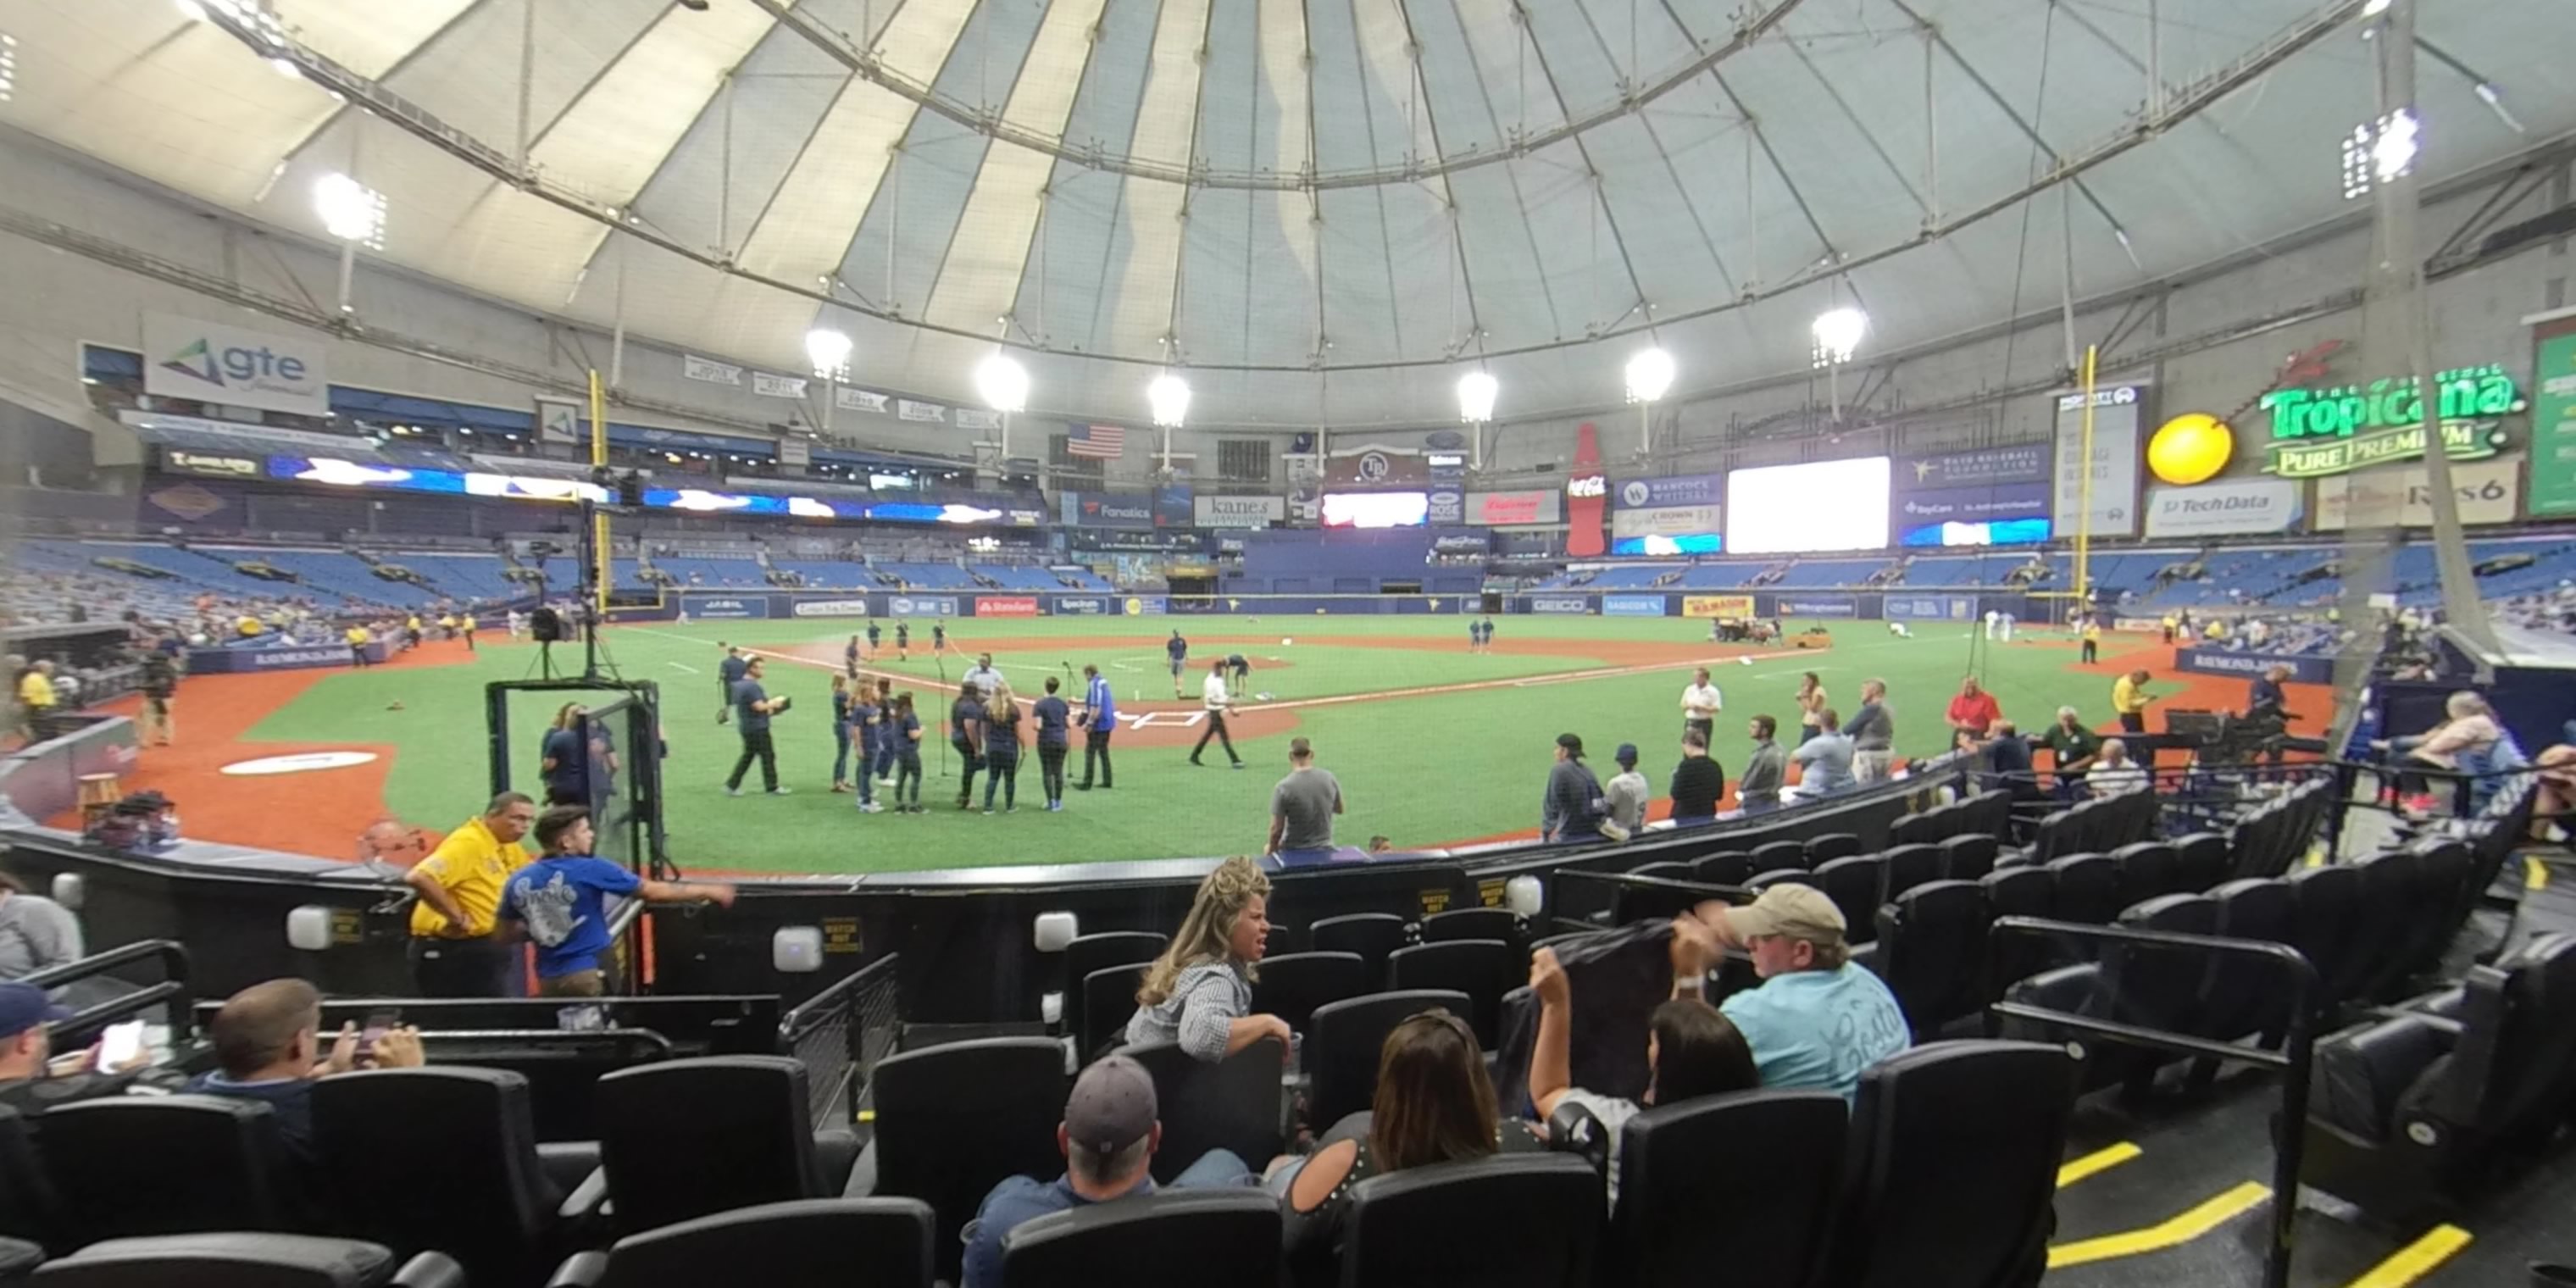 section 104 panoramic seat view  for baseball - tropicana field